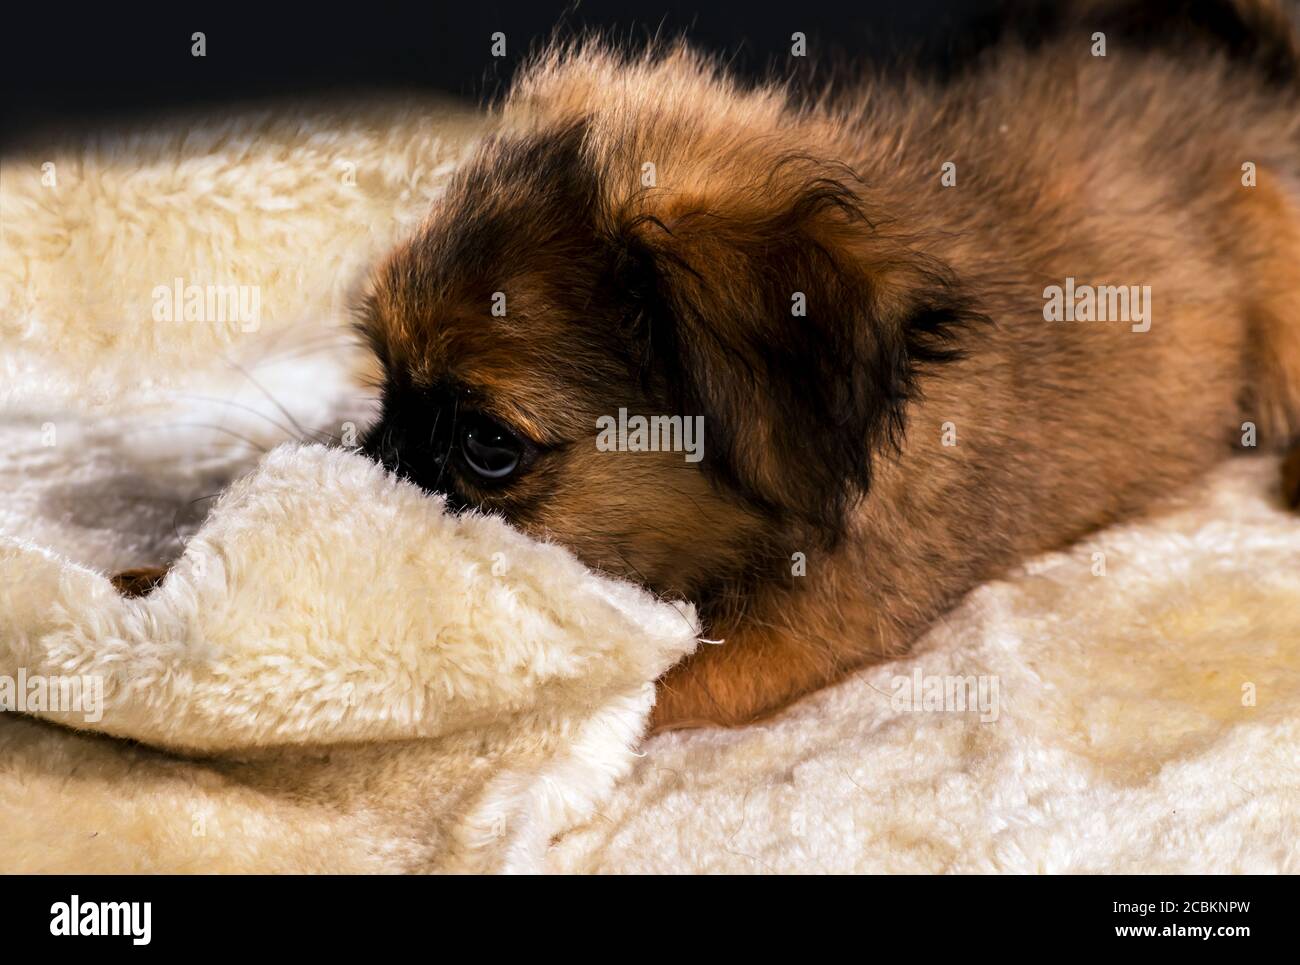 Indoors photo of a little furry dog lying down on furry clothes. Stock Photo